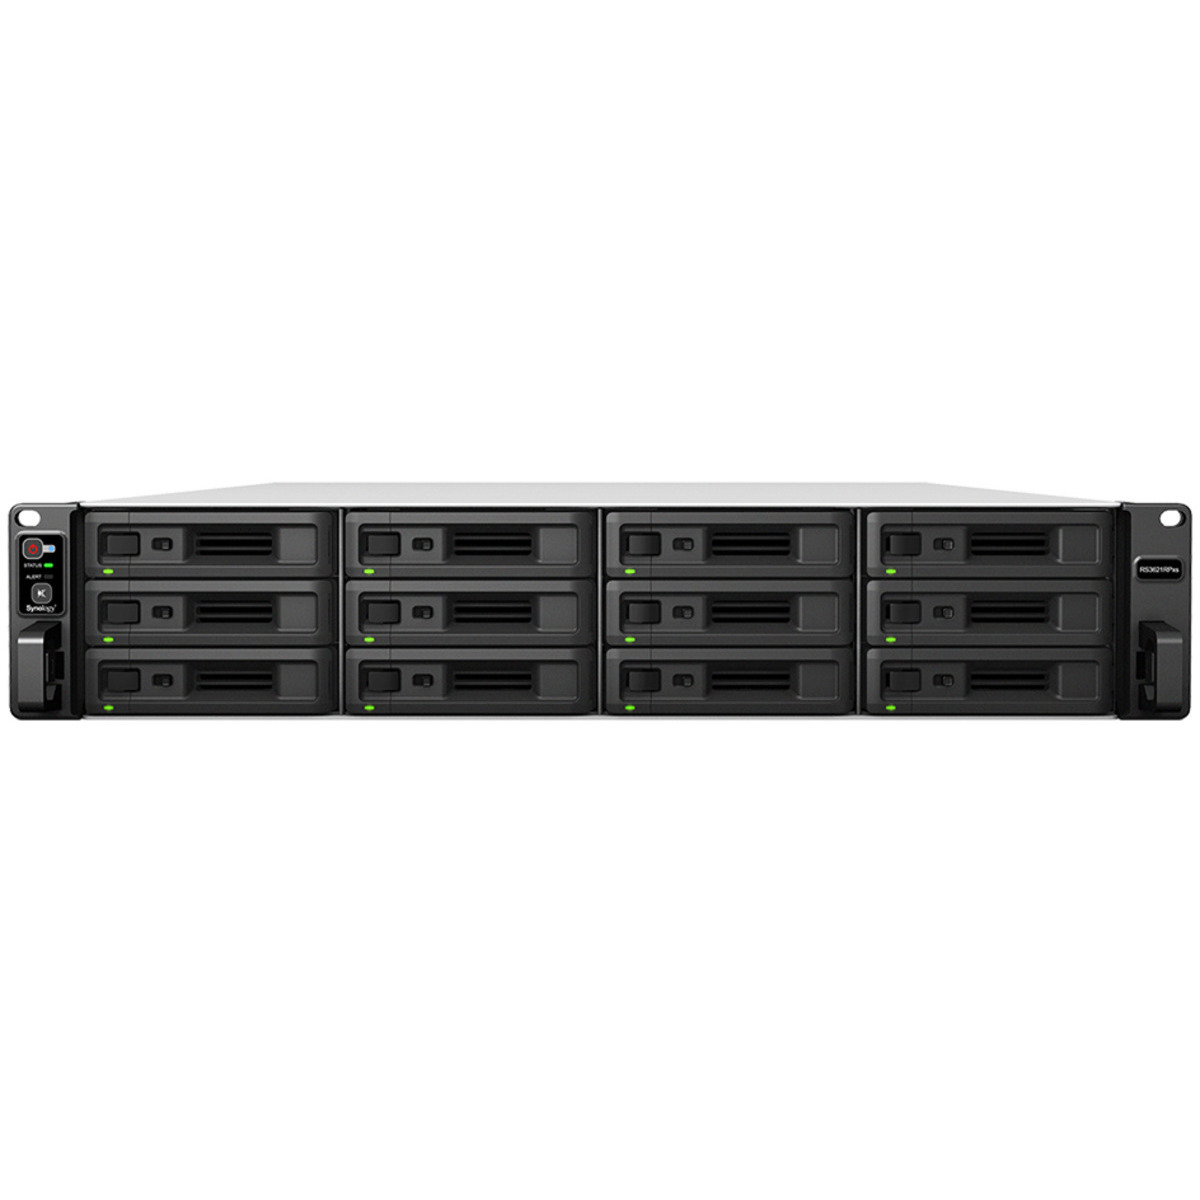 Synology RackStation RS3621RPxs 180tb 12-Bay RackMount Large Business / Enterprise NAS - Network Attached Storage Device 9x20tb Western Digital Red Pro WD201KFGX 3.5 7200rpm SATA 6Gb/s HDD NAS Class Drives Installed - Burn-In Tested RackStation RS3621RPxs